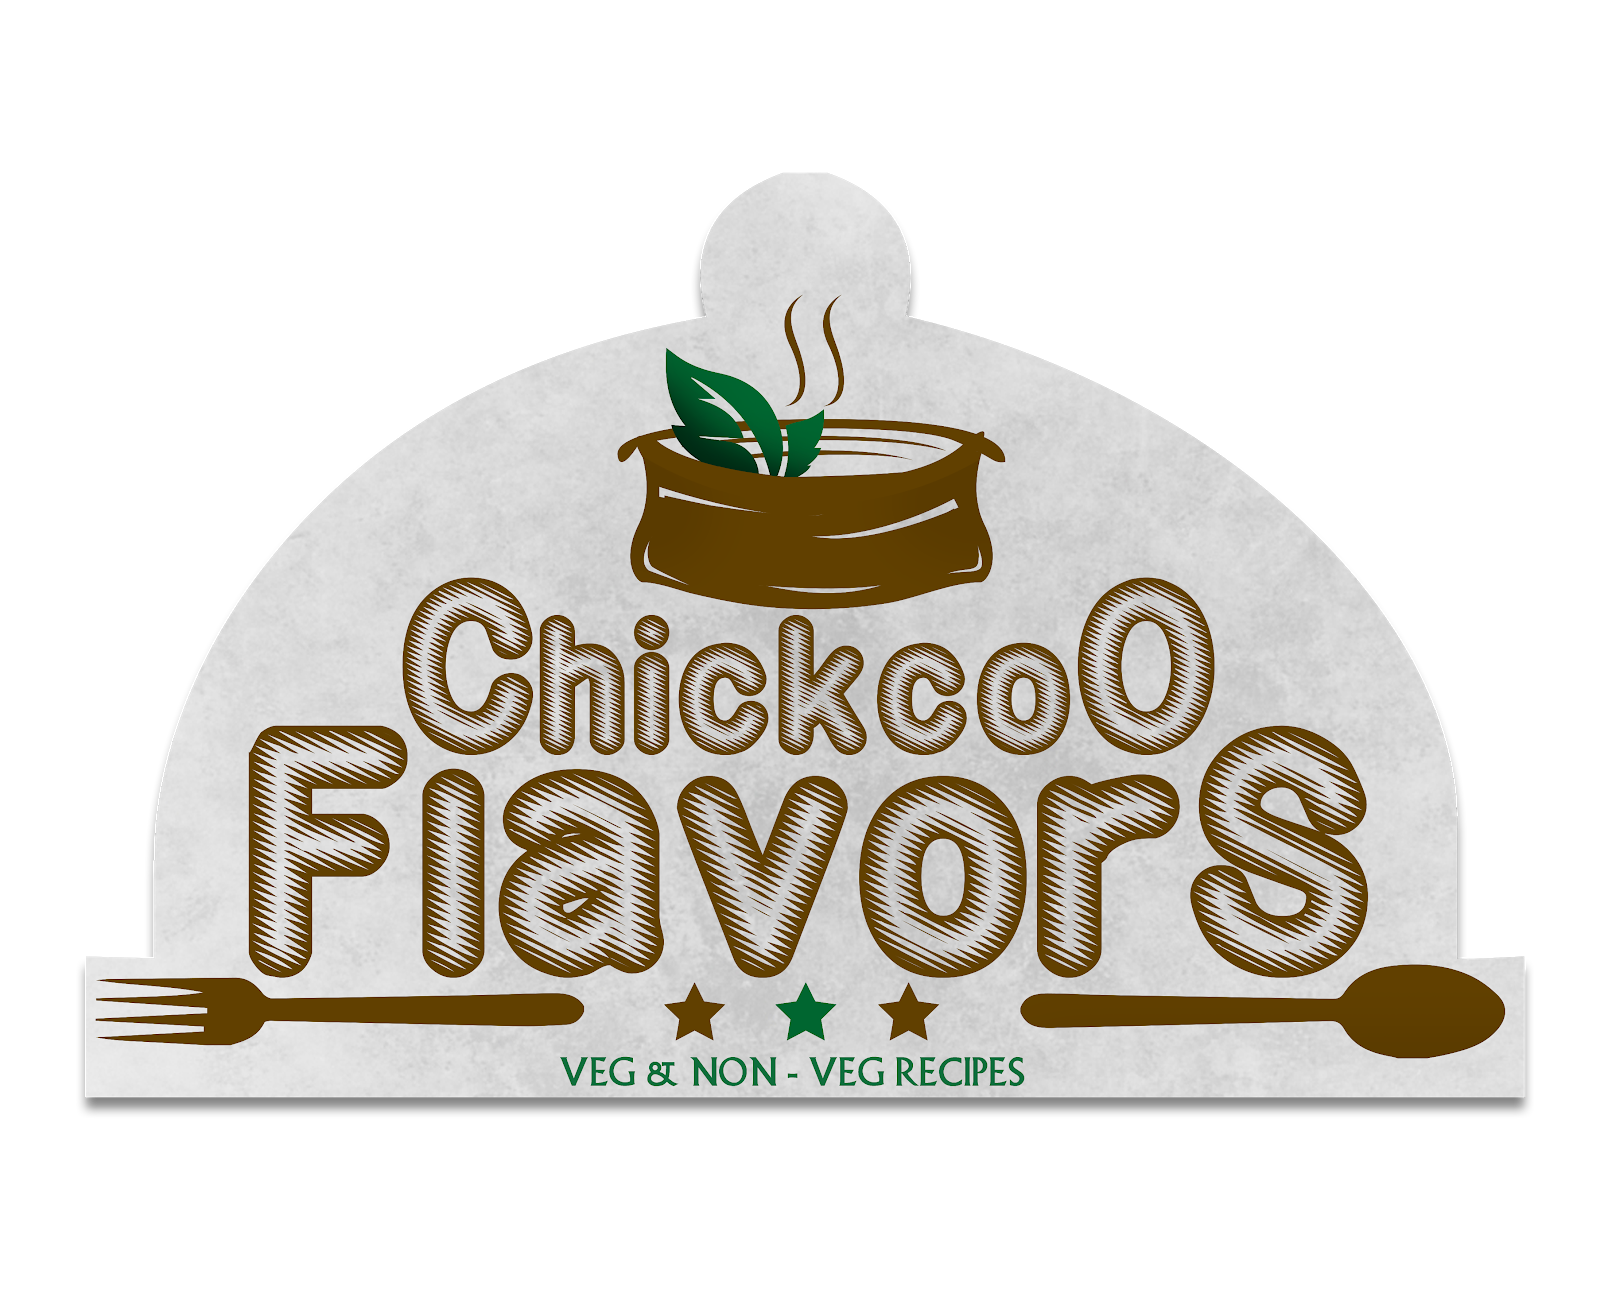 Chickcoo flavors